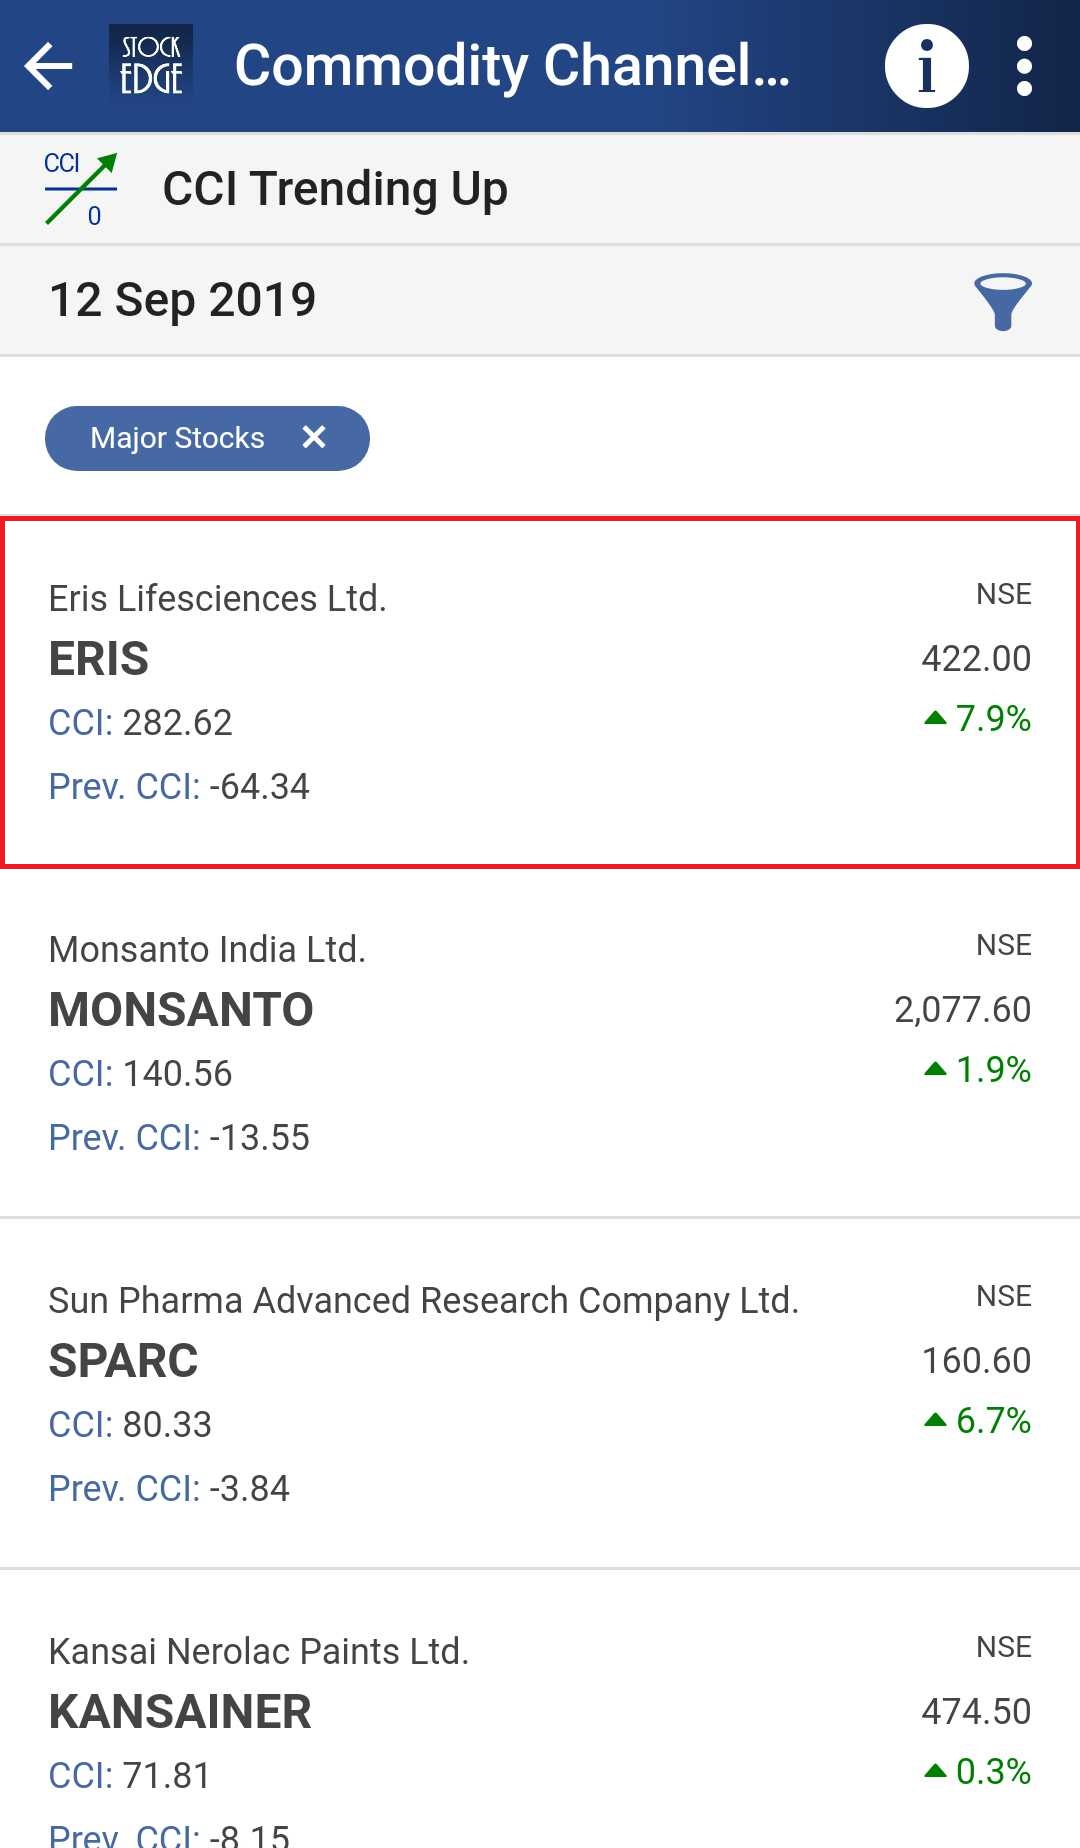 A list of cci trending up of various stocks as of 12 sep-2019.